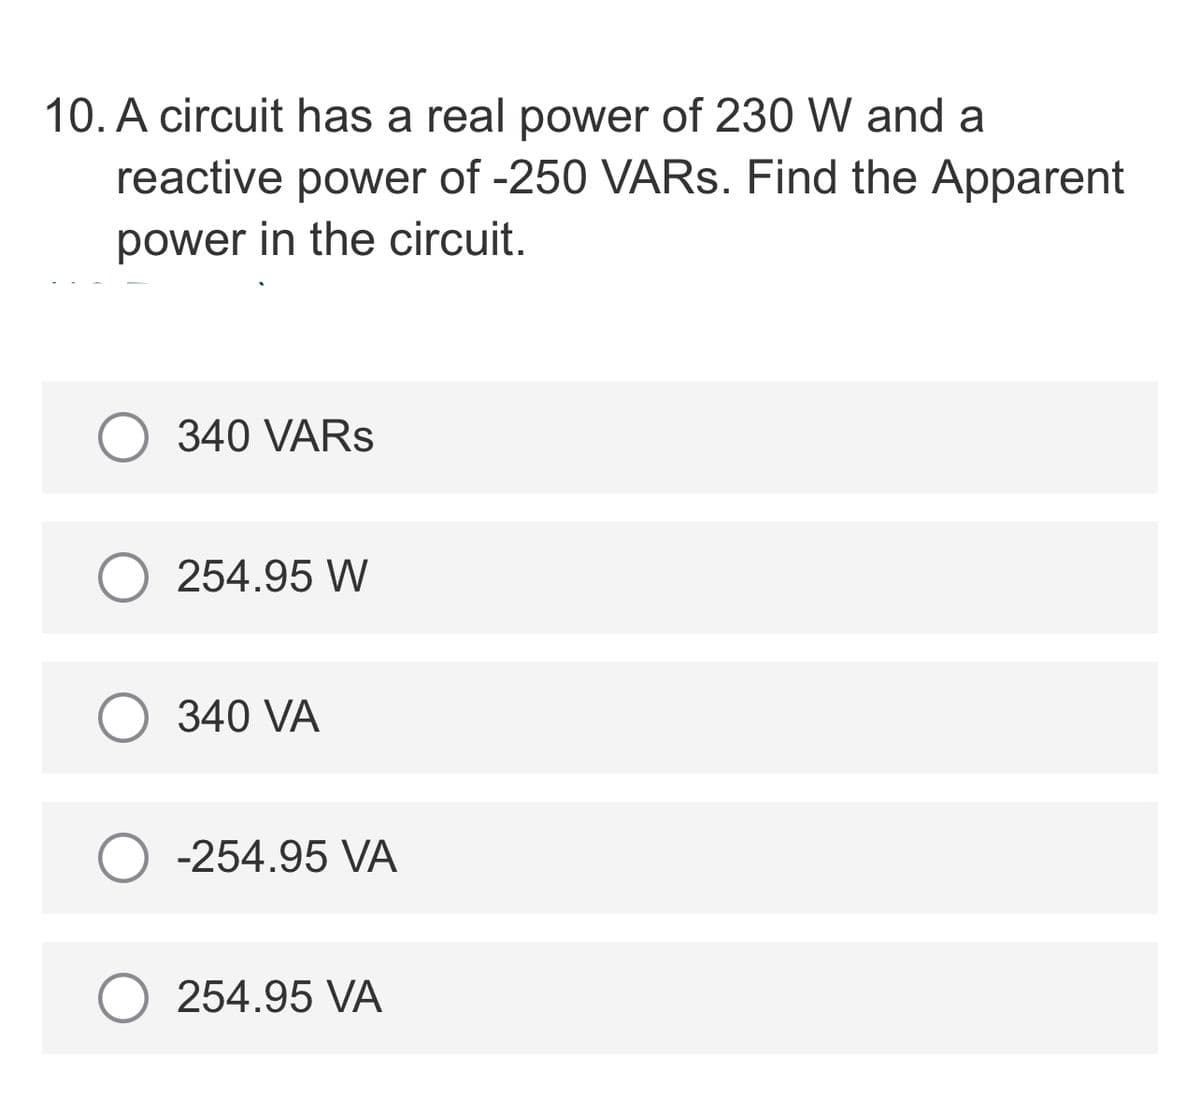 10. A circuit has a real power of 230 W and a
reactive power of -250 VARS. Find the Apparent
power in the circuit.
340 VARS
254.95 W
340 VA
-254.95 VA
254.95 VA
